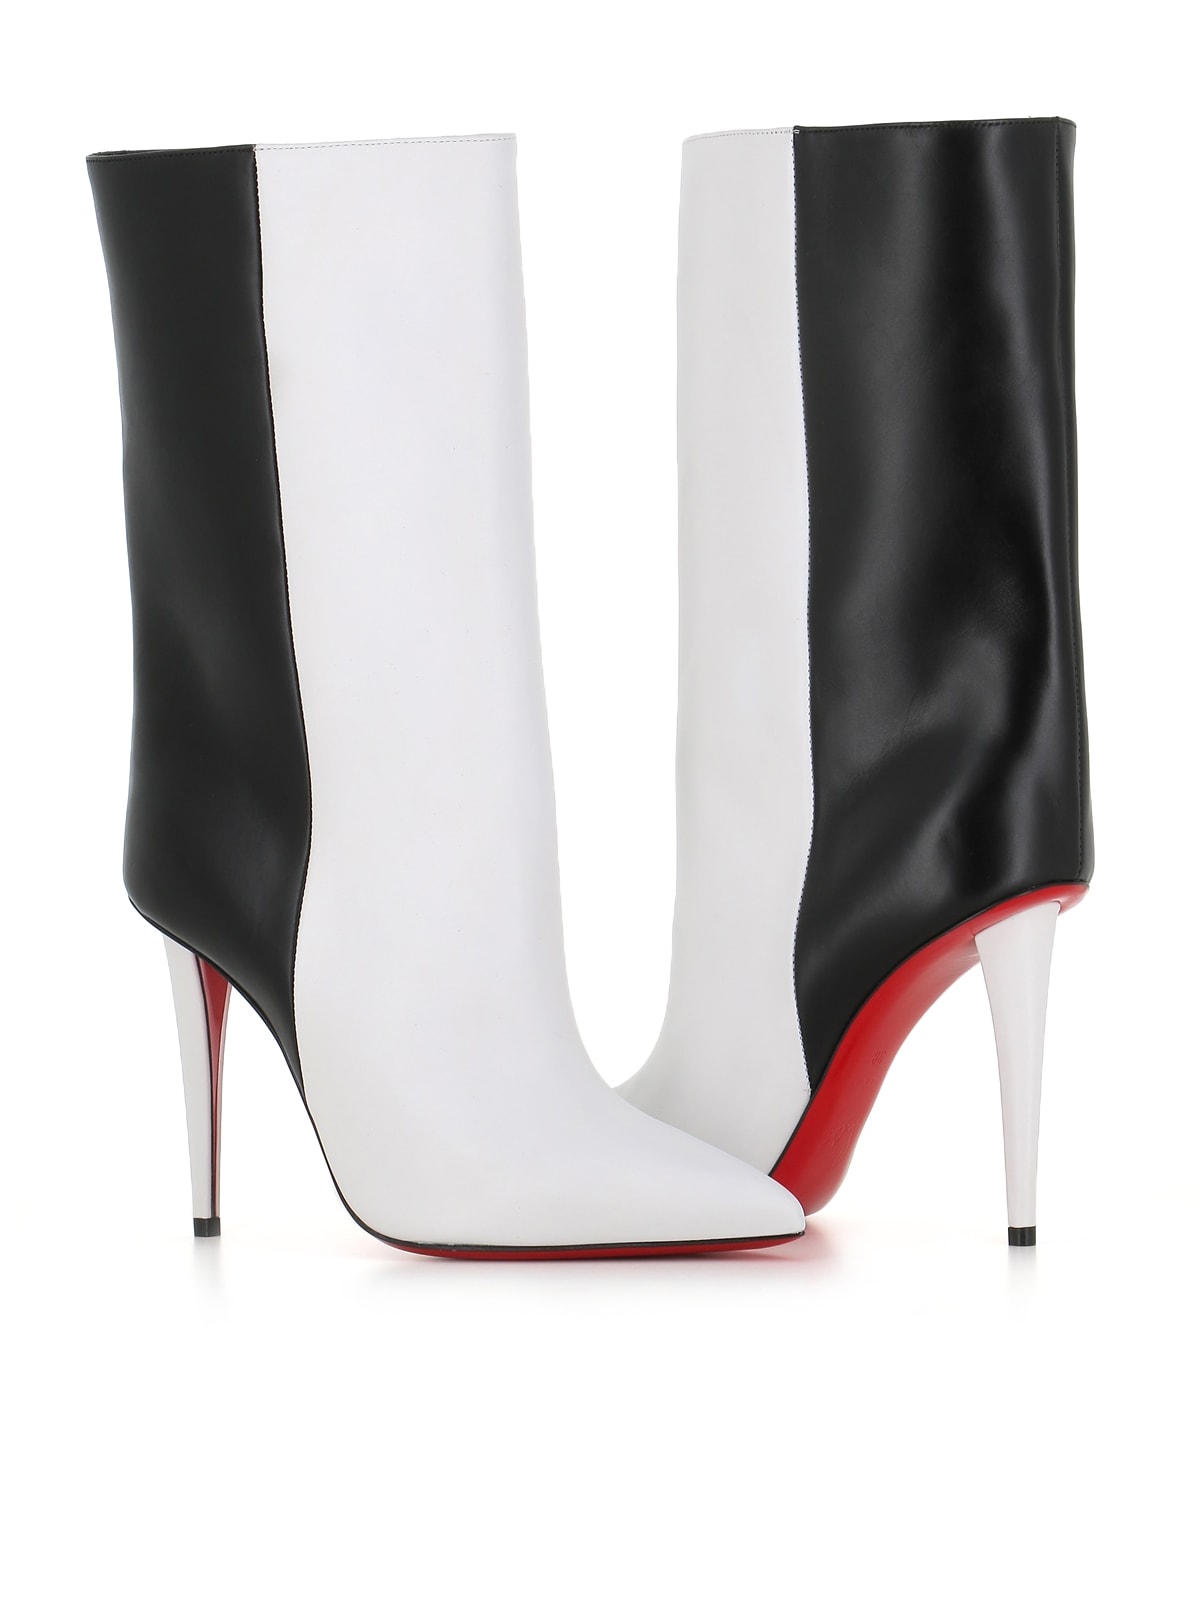 CHRISTIAN LOUBOUTIN Santia Botta 85 embroidered suede and leather knee boots